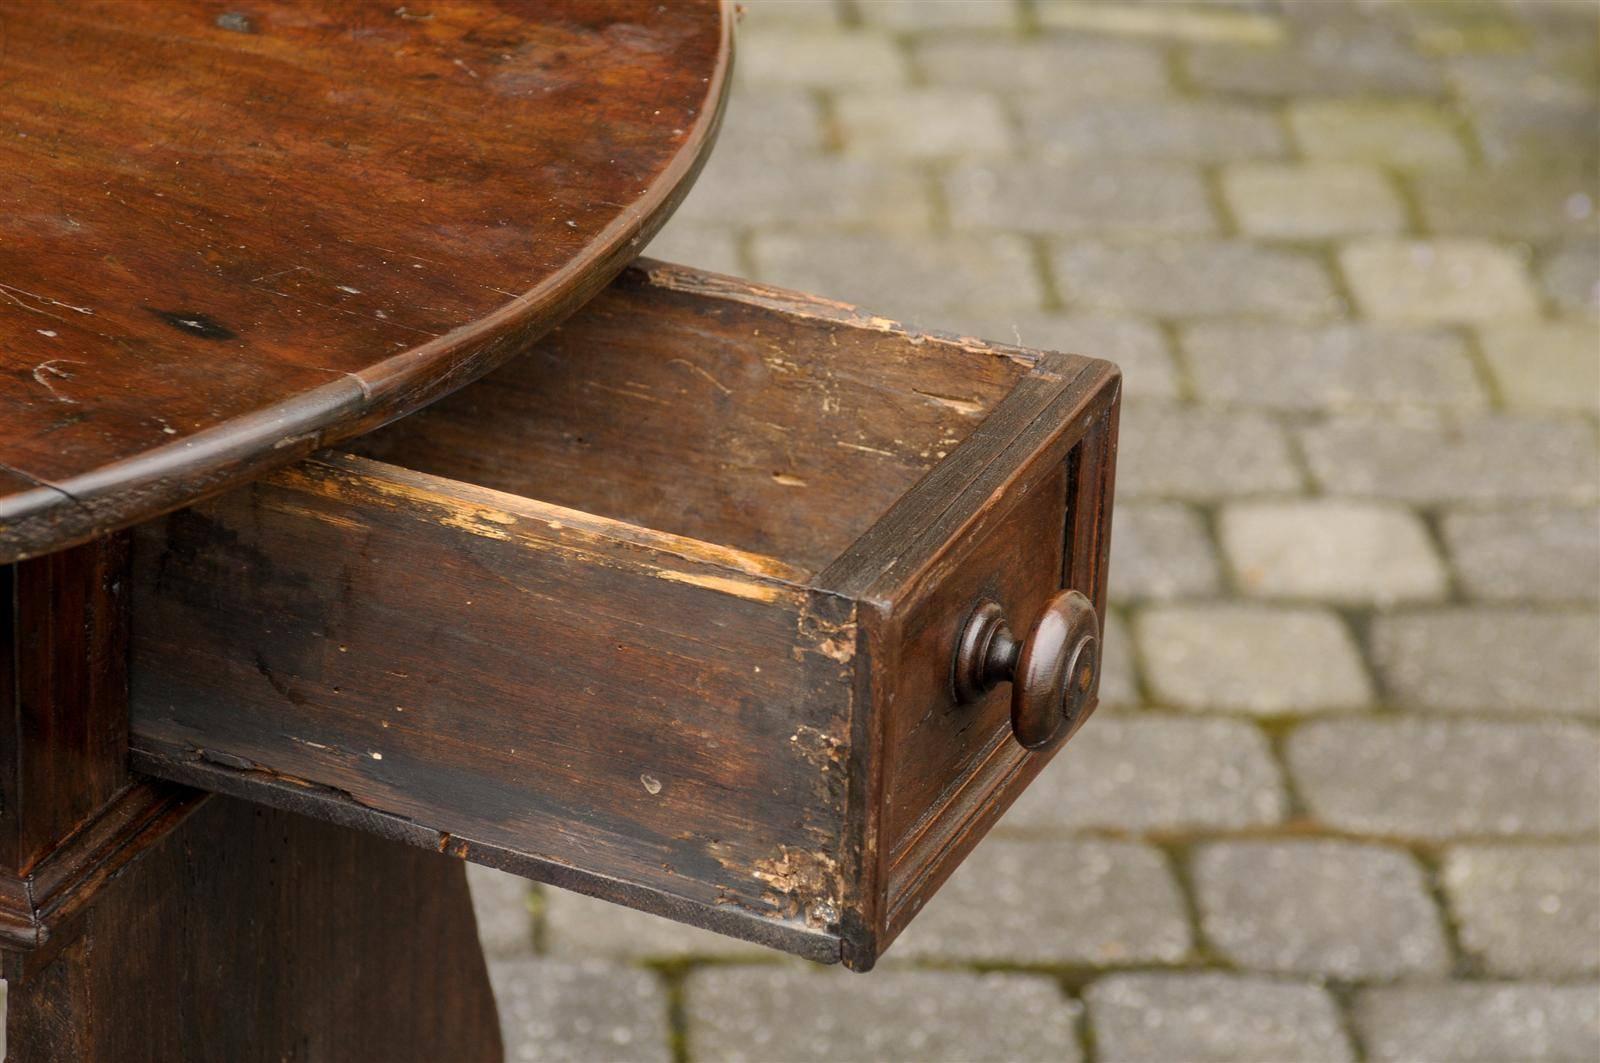 Oval Italian Walnut Drop-Leaf Table from the Late 18th Century with Trestle Base 4